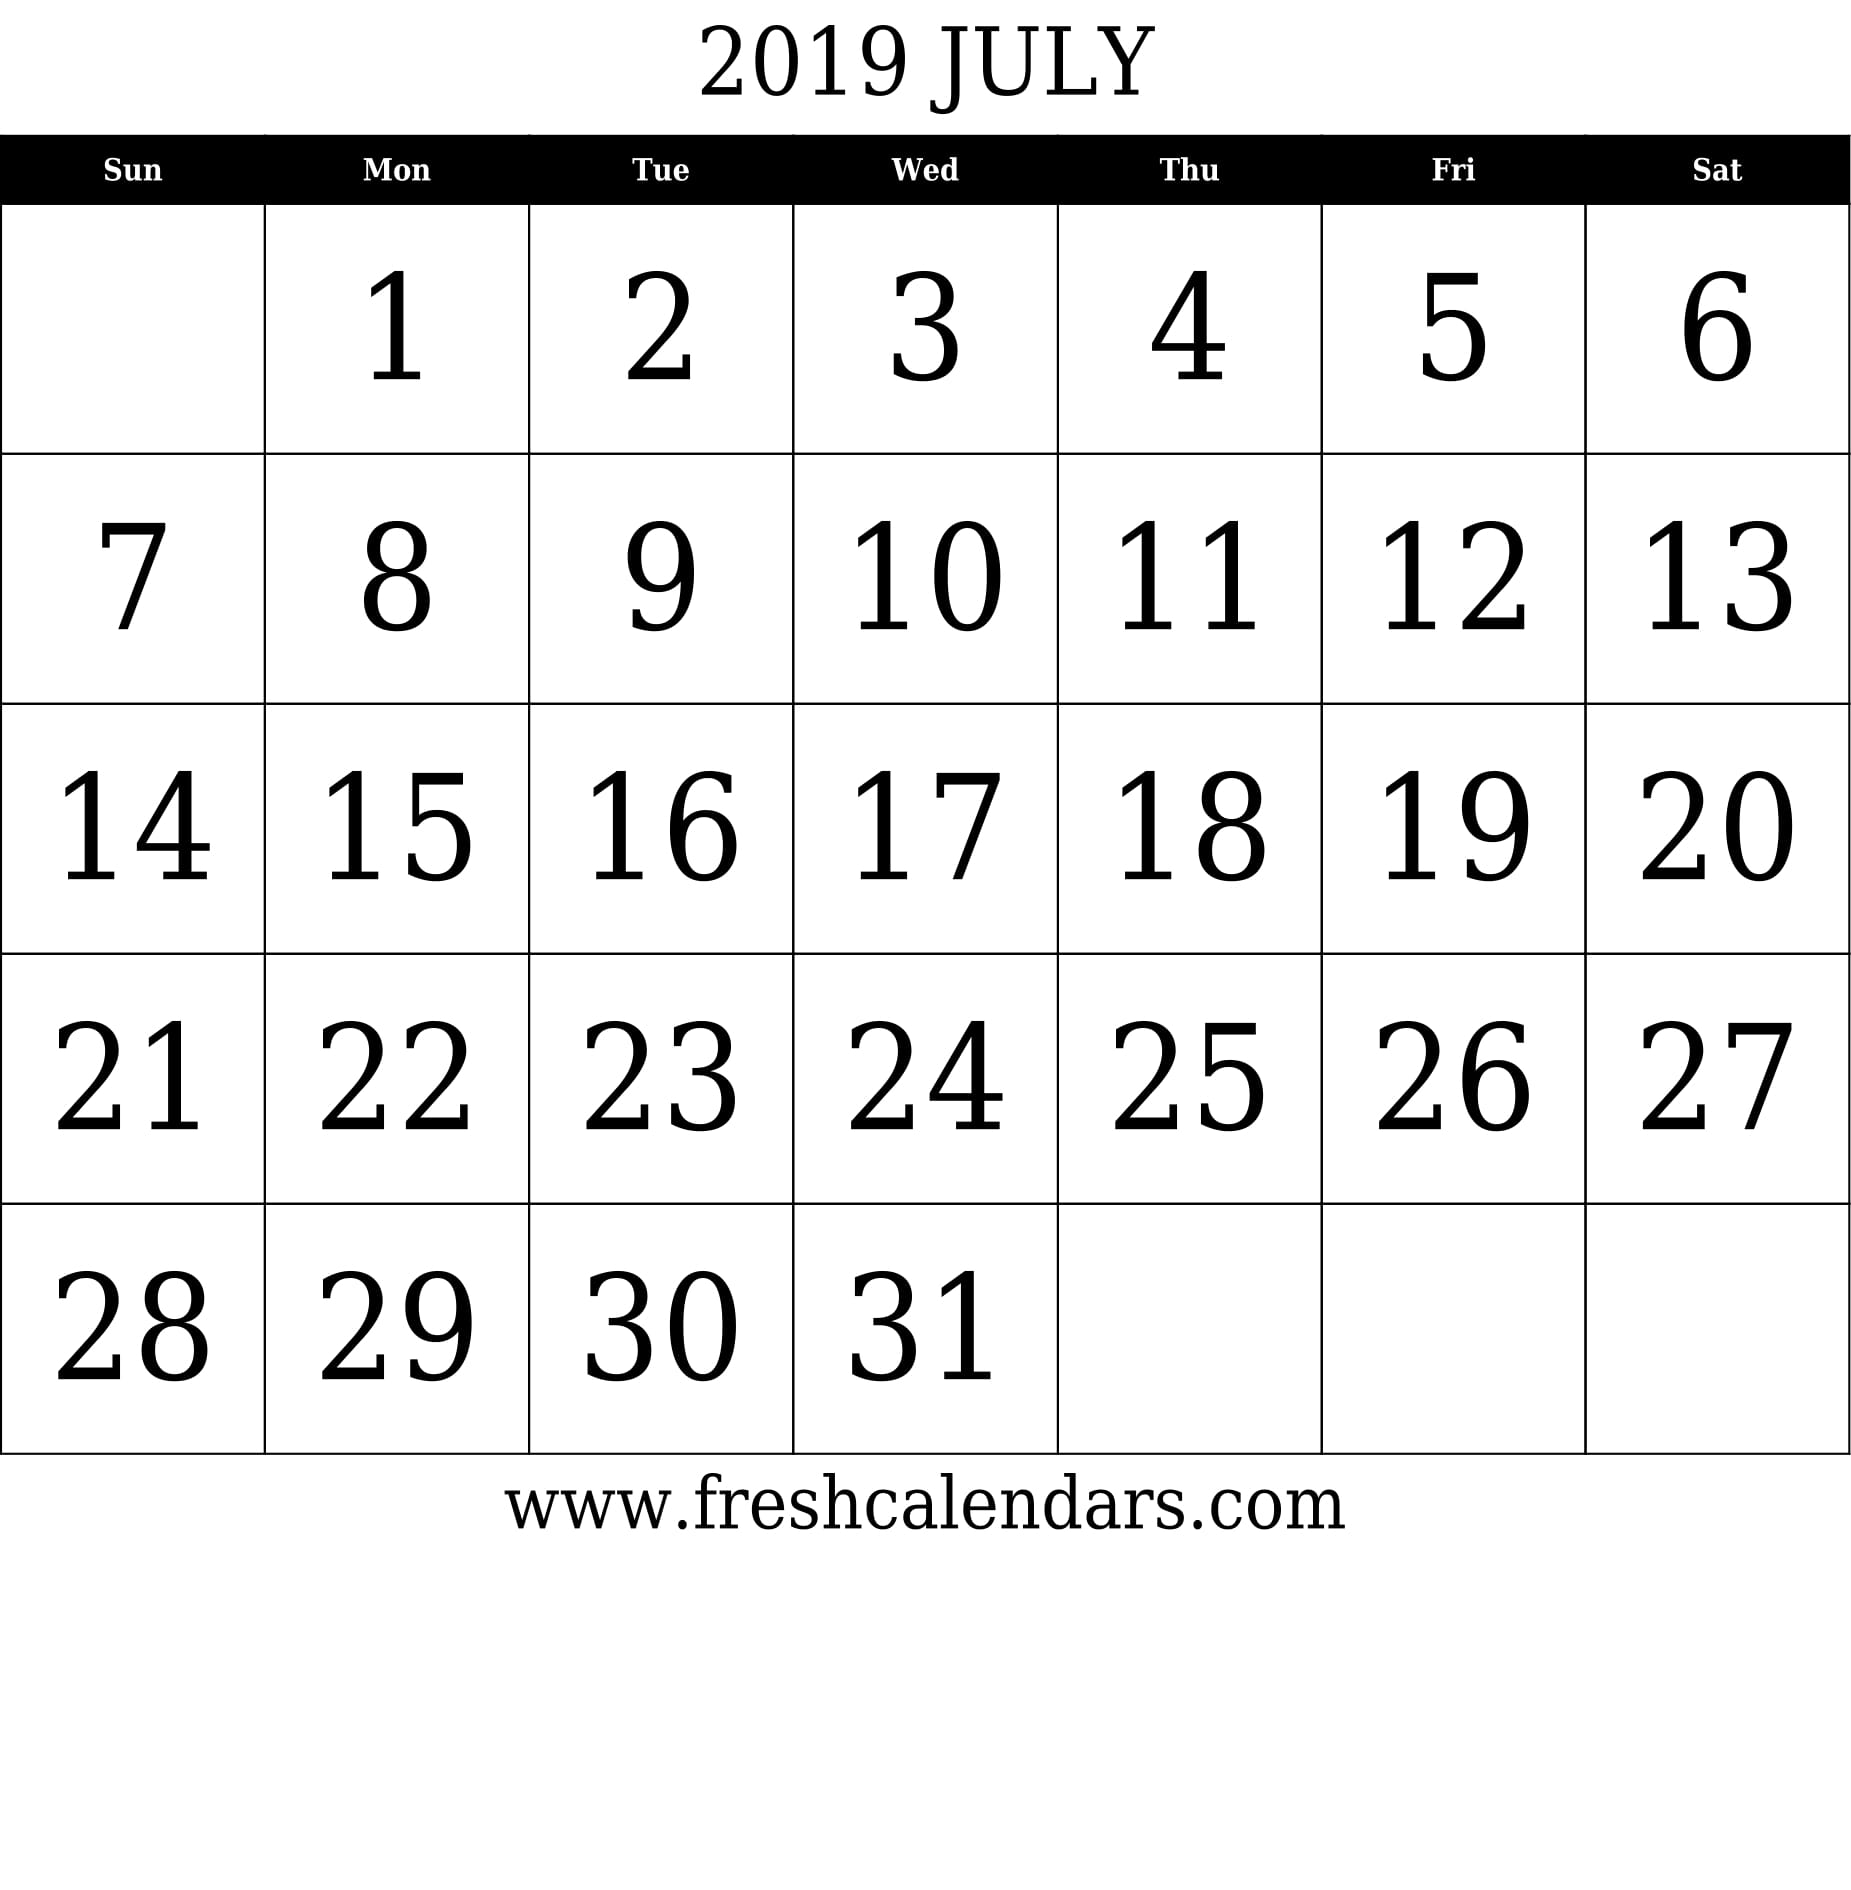 July 2019 Calendar With Large Dates